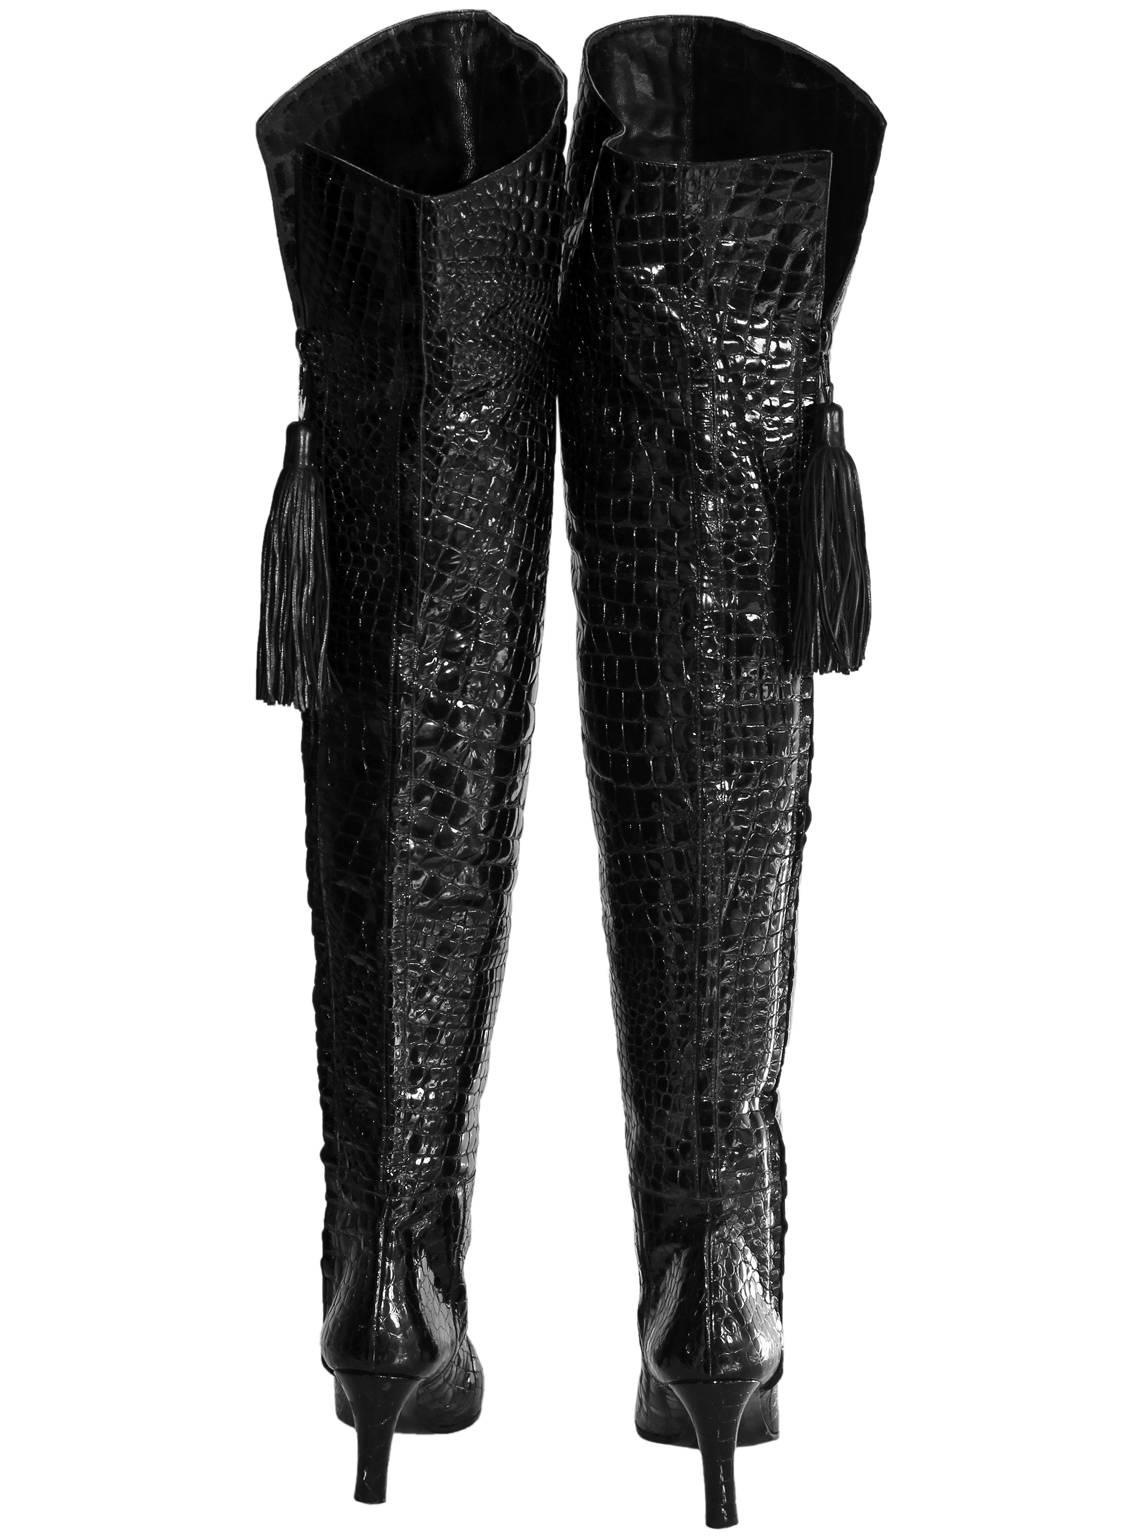 The Most Amazing Pair Of Black Vintage Yves Saint Laurent YSL Patent Crocodile Leather Thigh Boots!